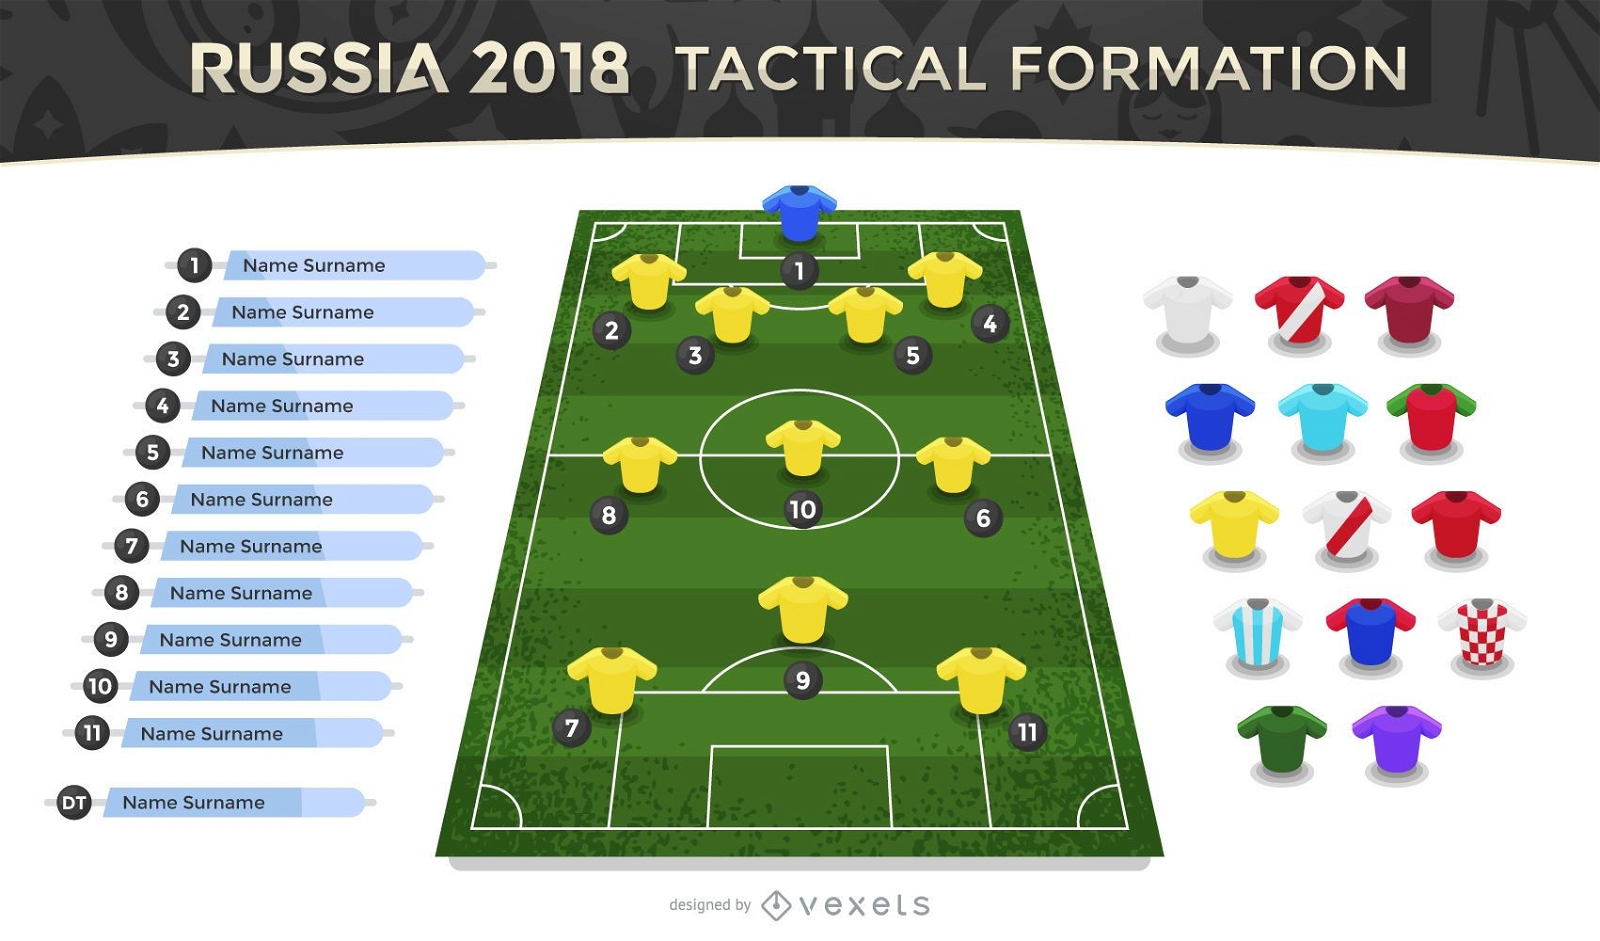 Russia 2018 tactical formations